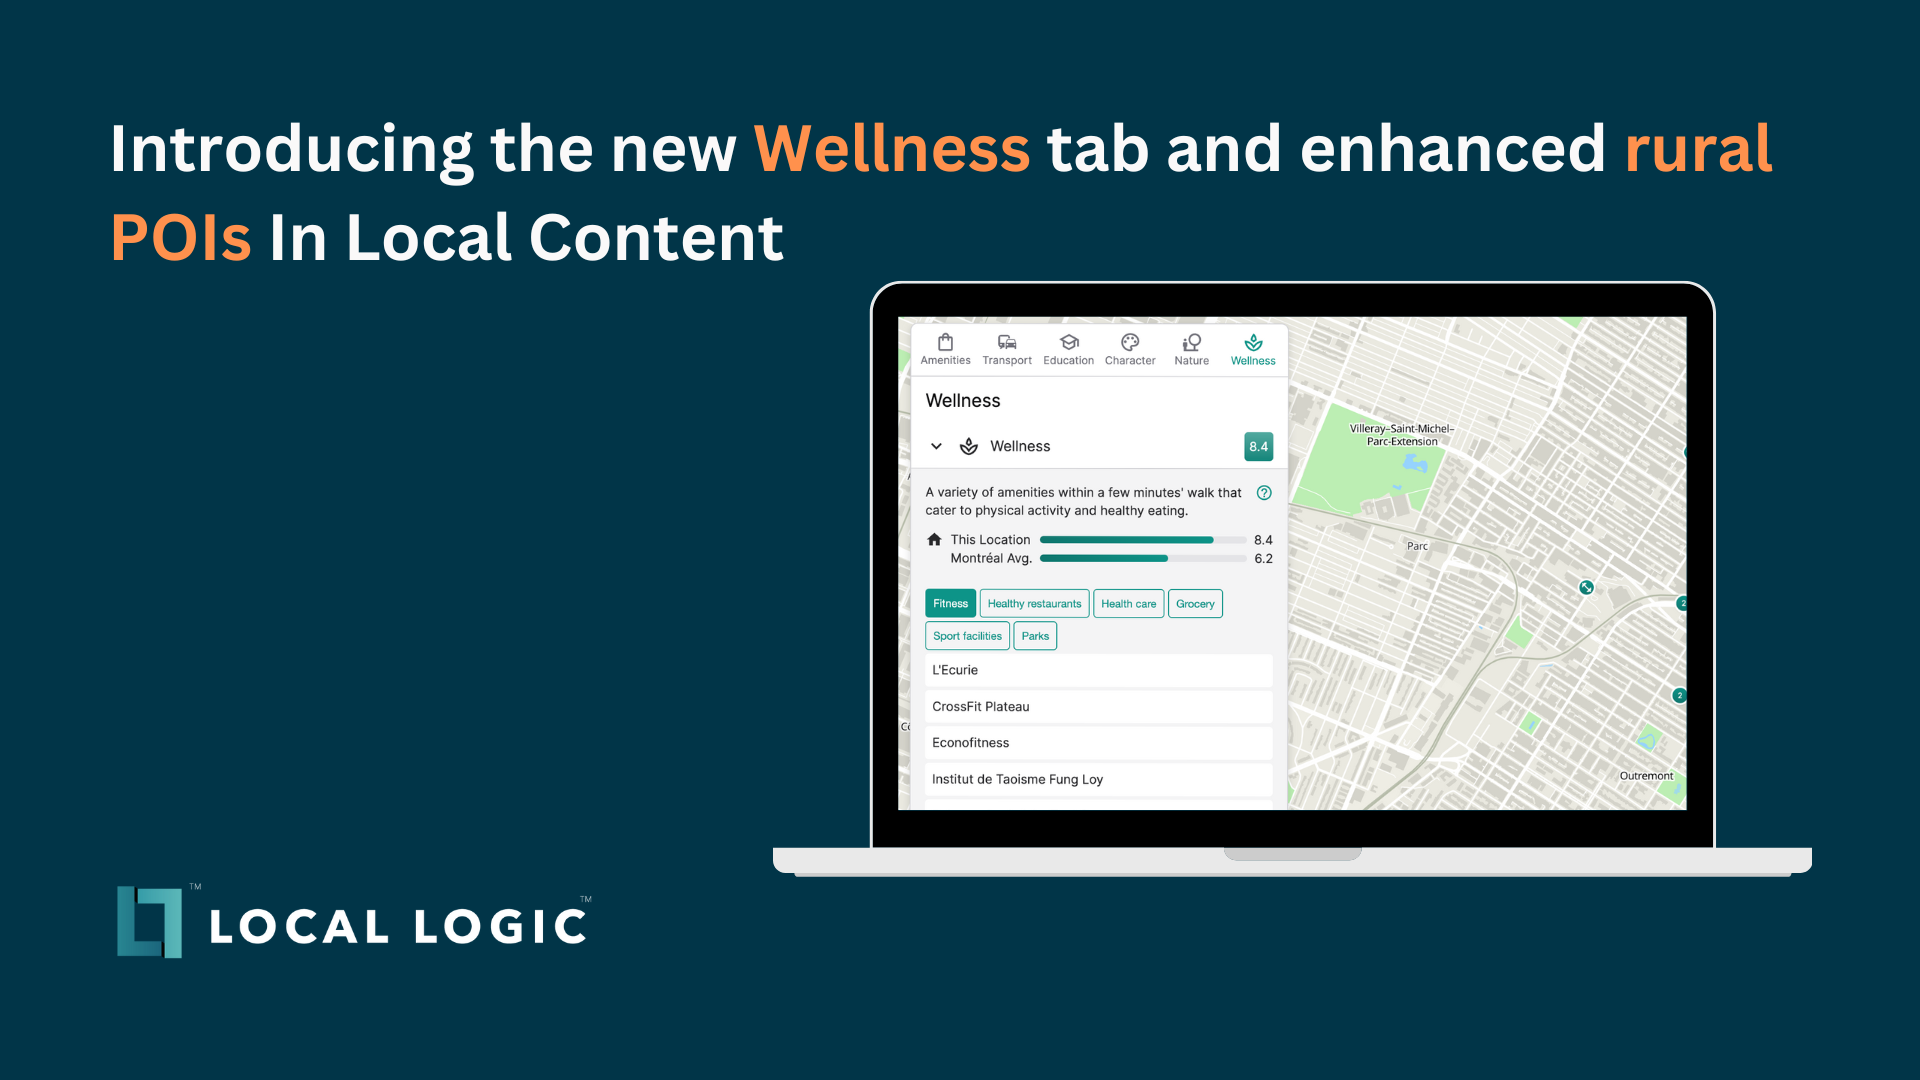 Promotional visual graphic announcing Local Logic’s latest product update including the new Wellness tab and enhanced rural POIs in Local Content